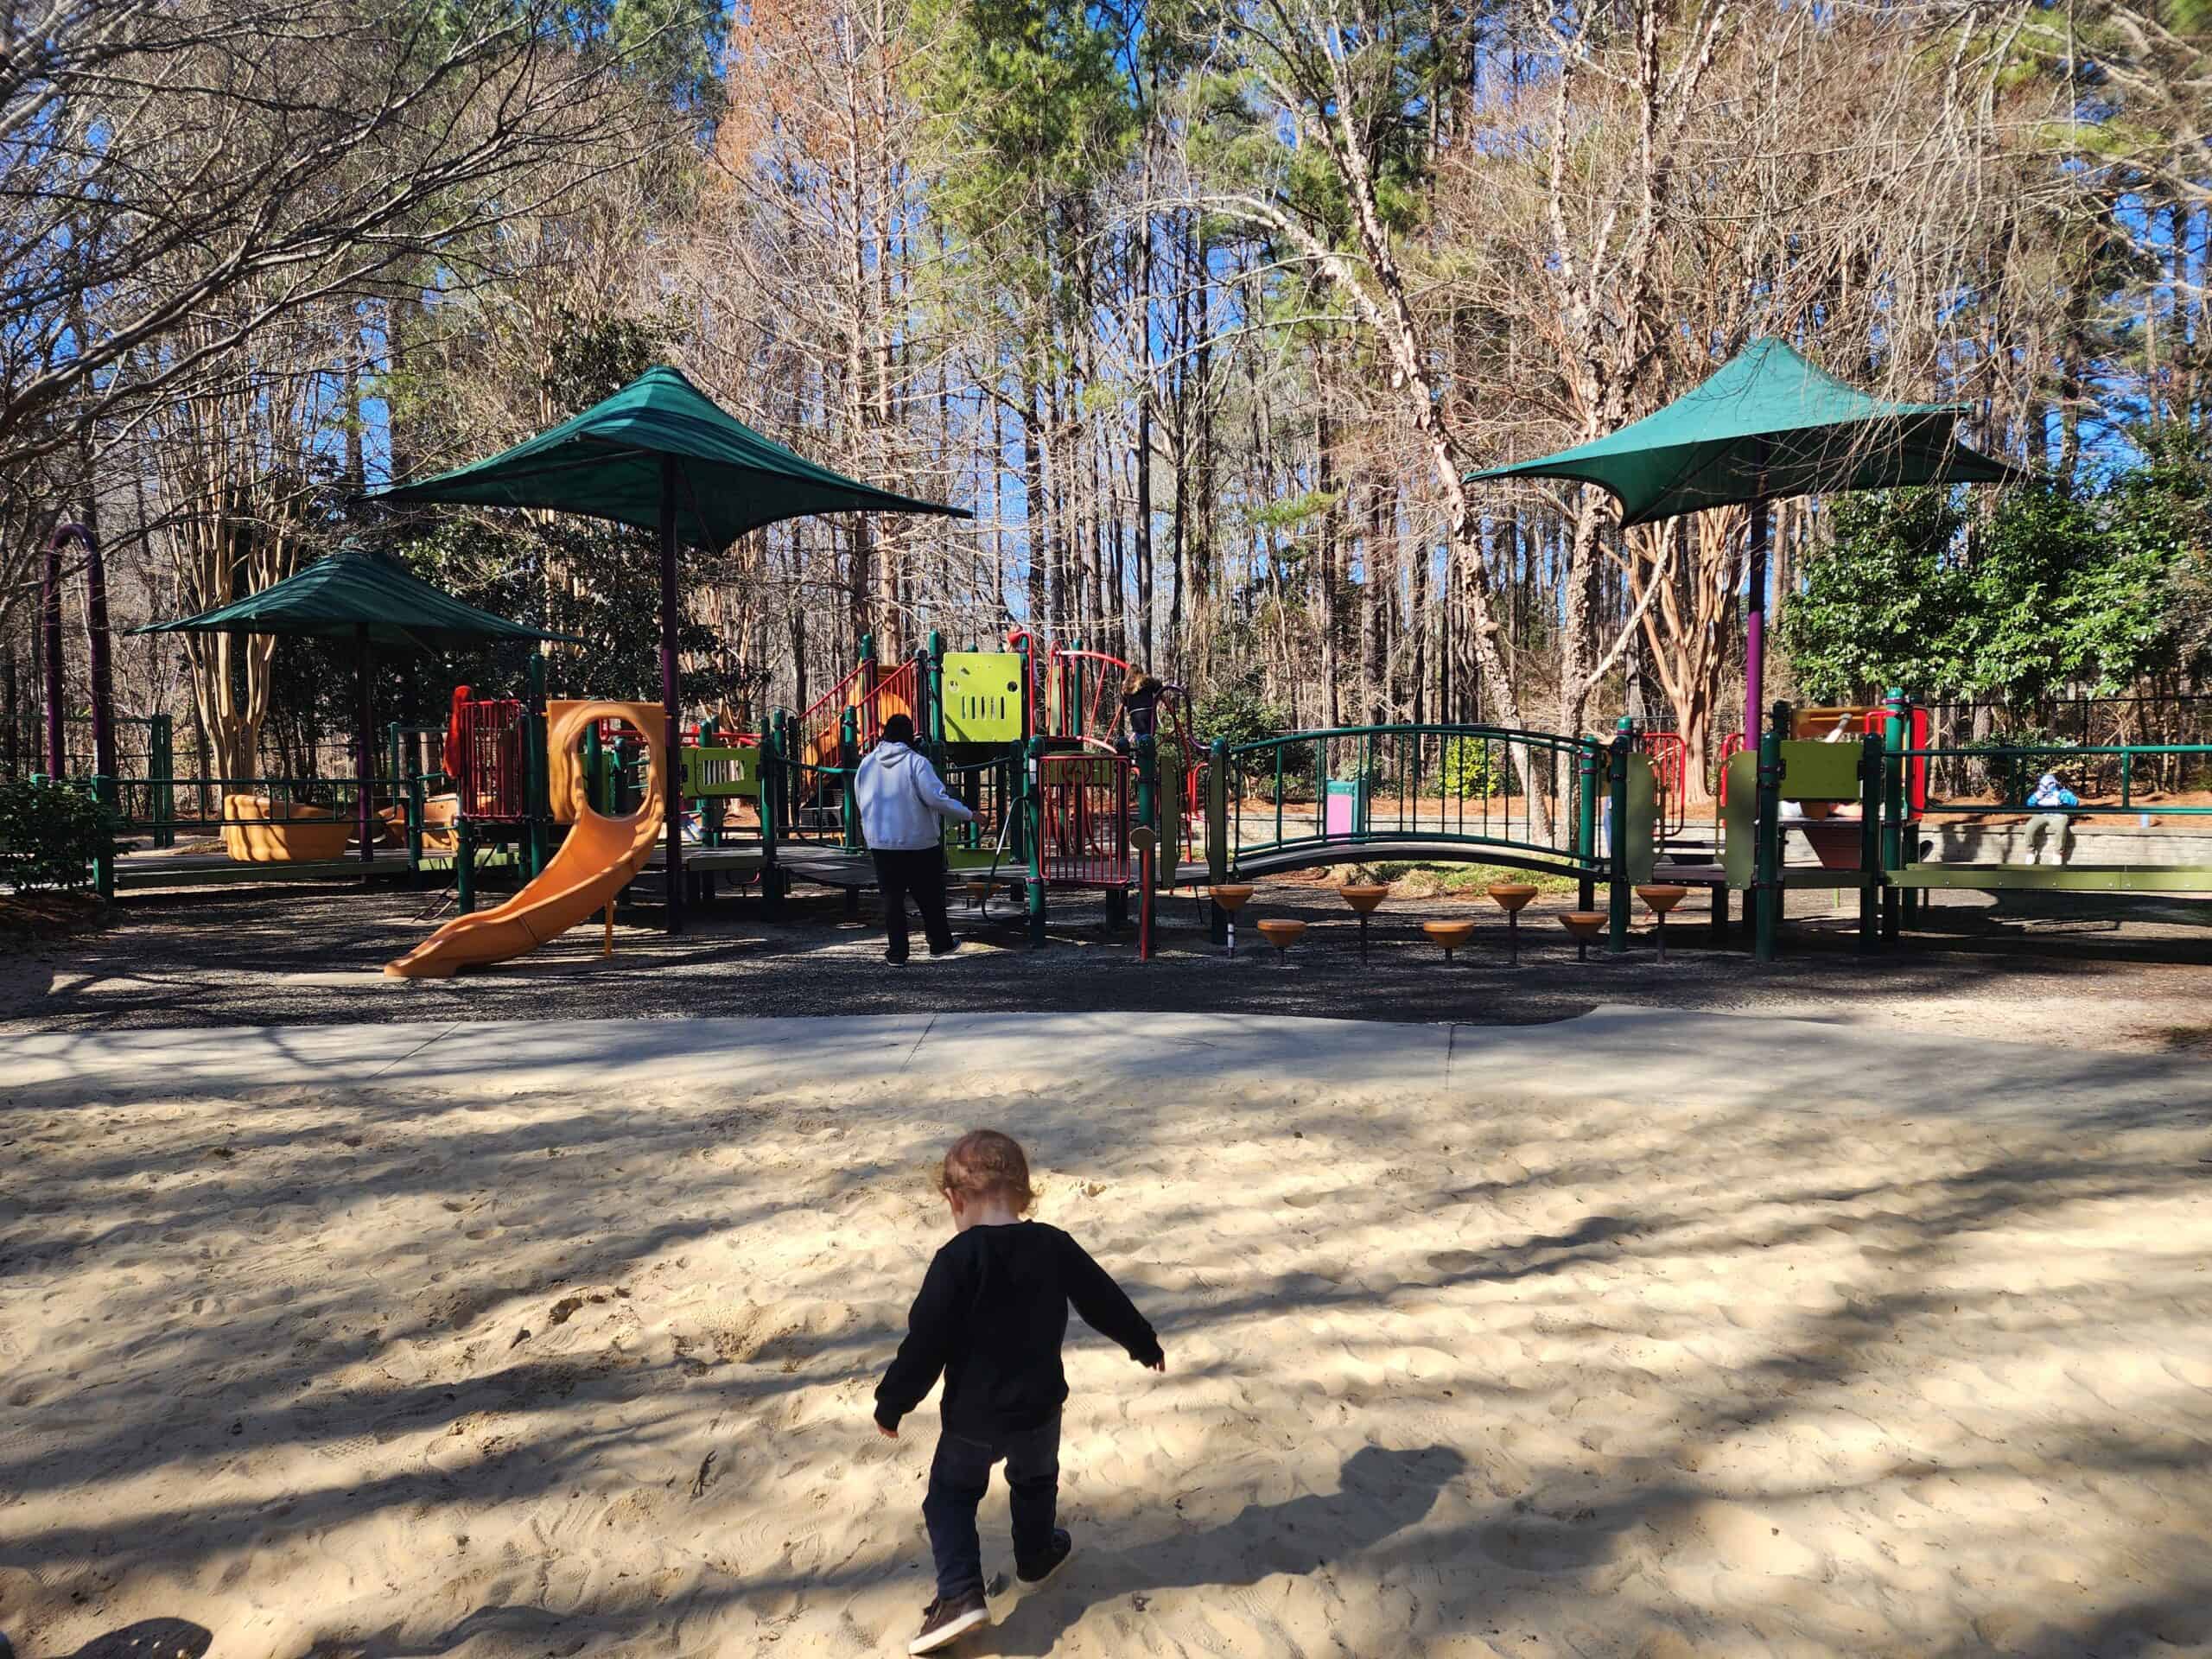 A toddler approaches a colorful playground with green canopies and various play structures, shaded by tall pine trees on a sunny day, conveying a sense of outdoor fun and exploration for children